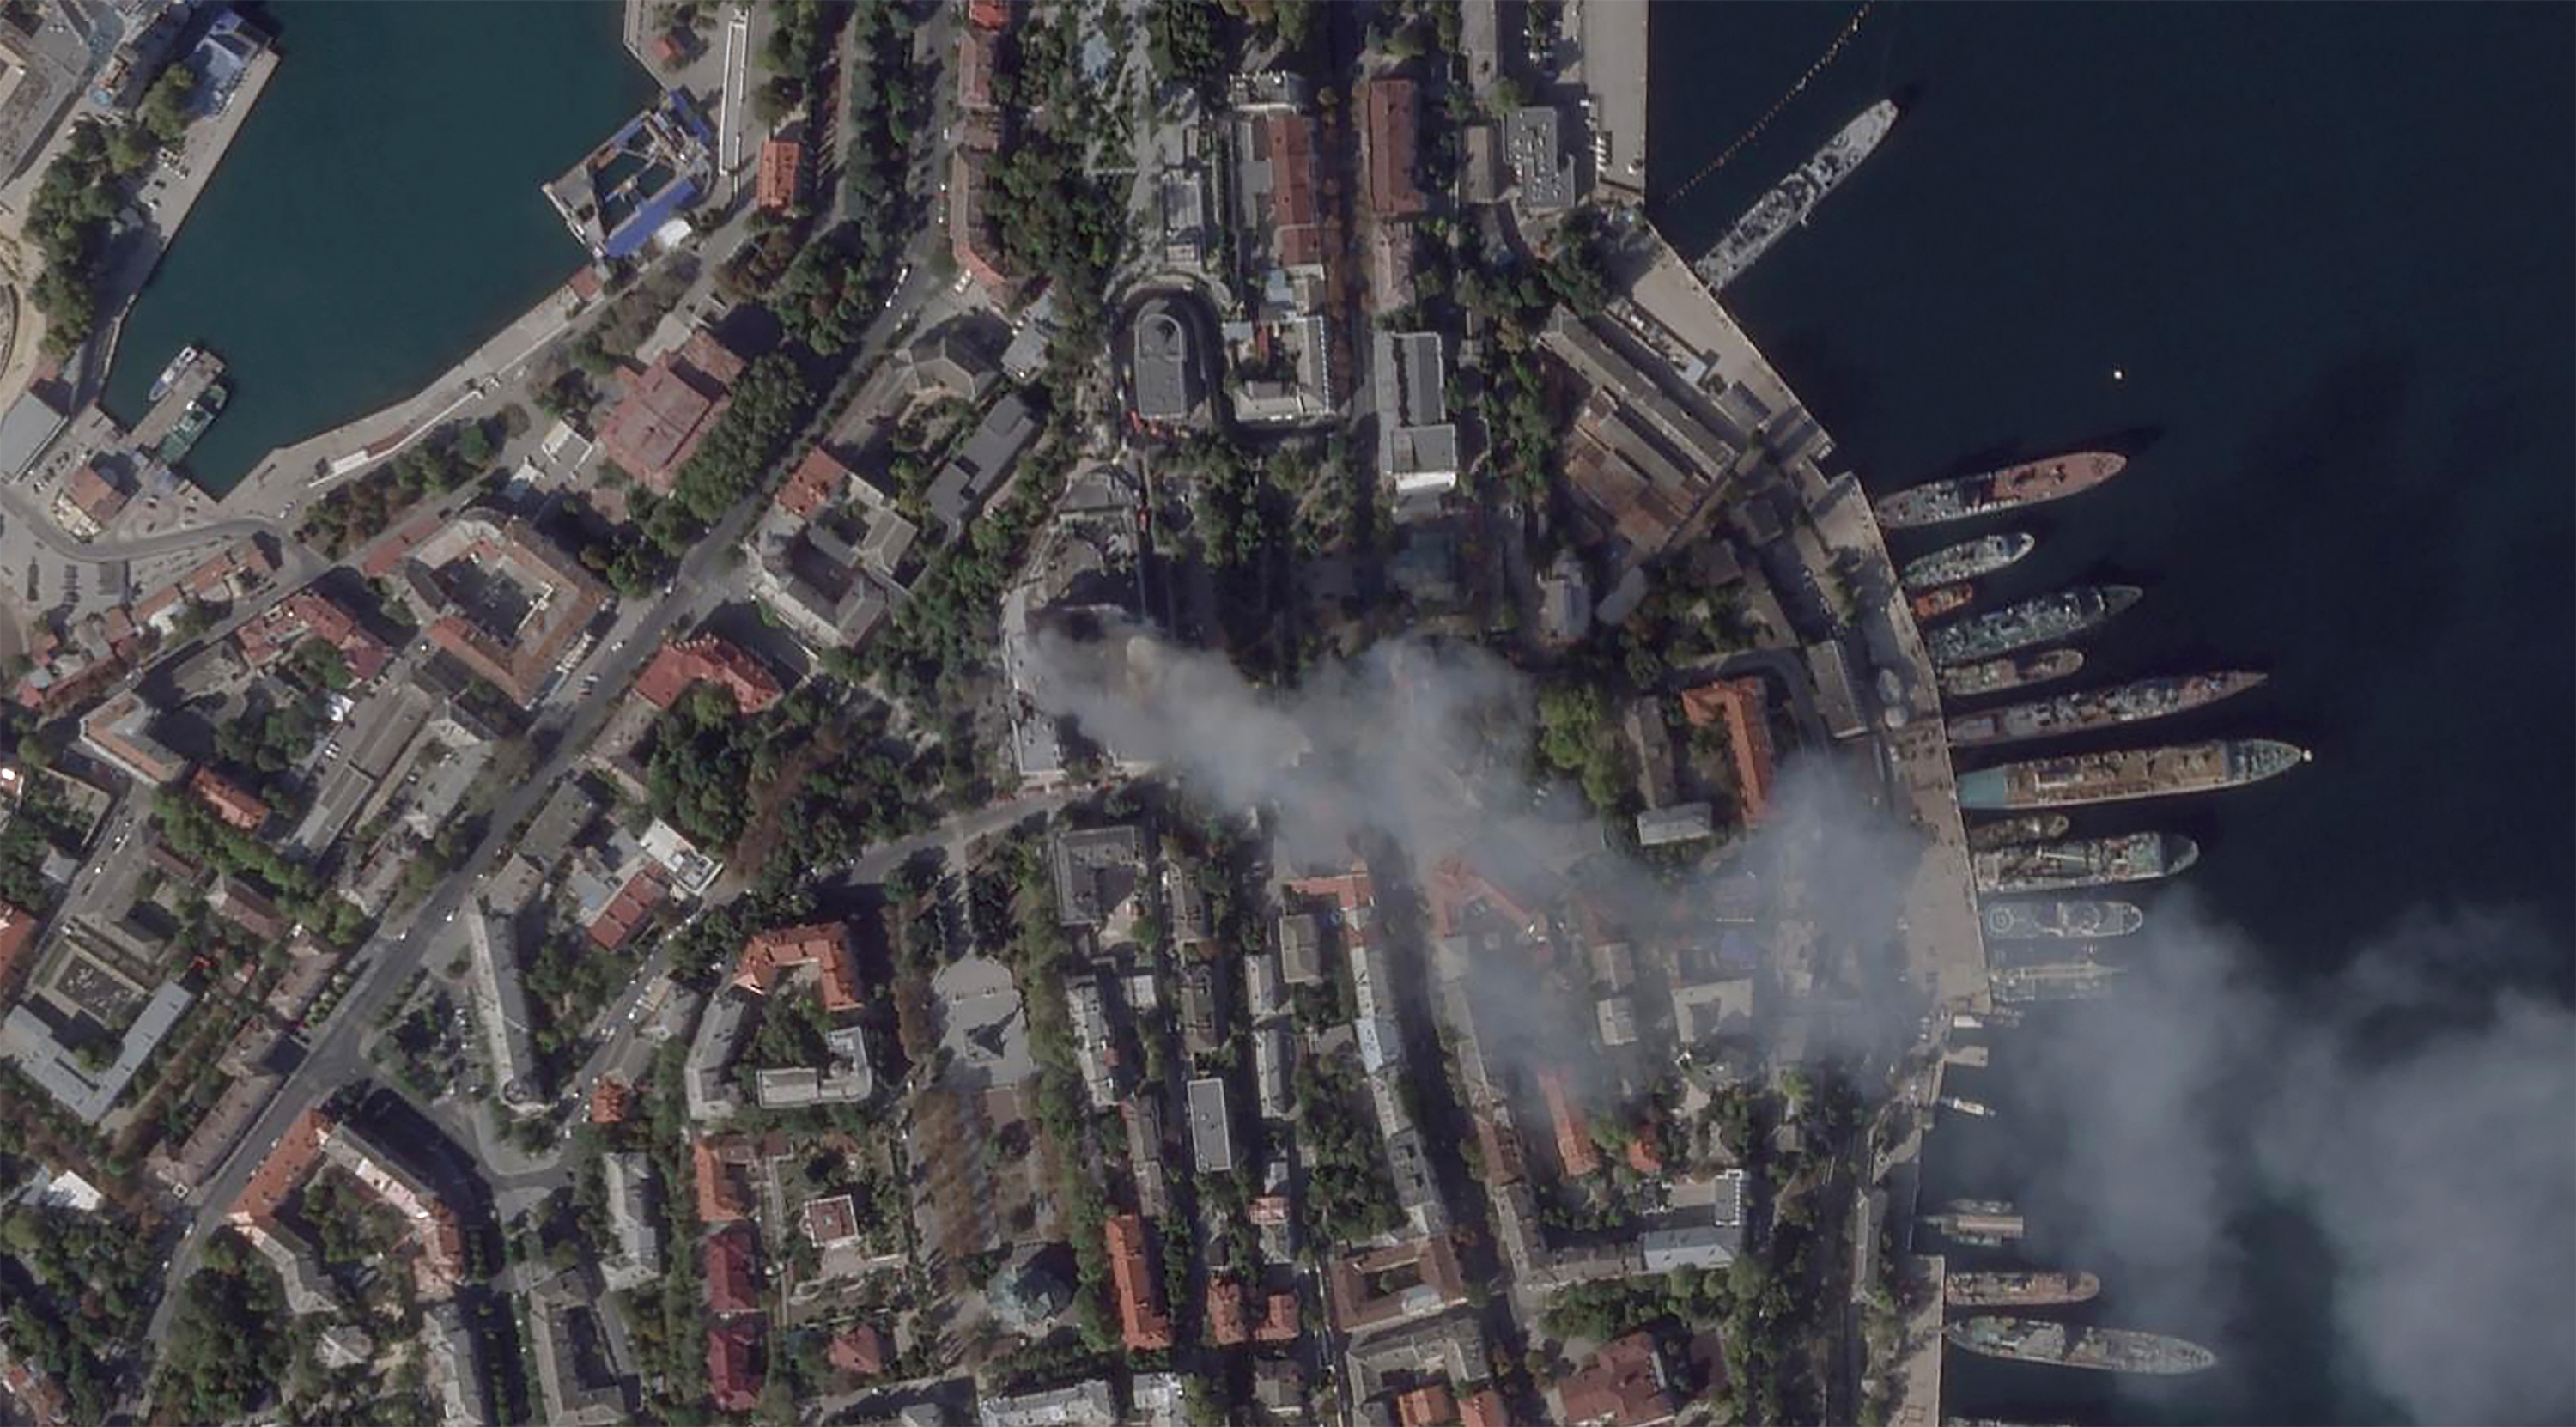 This satellite photo shows damage to a headquarters building for the Russian Black Sea fleet in Sevastopol, Crimea on Friday, September 22.